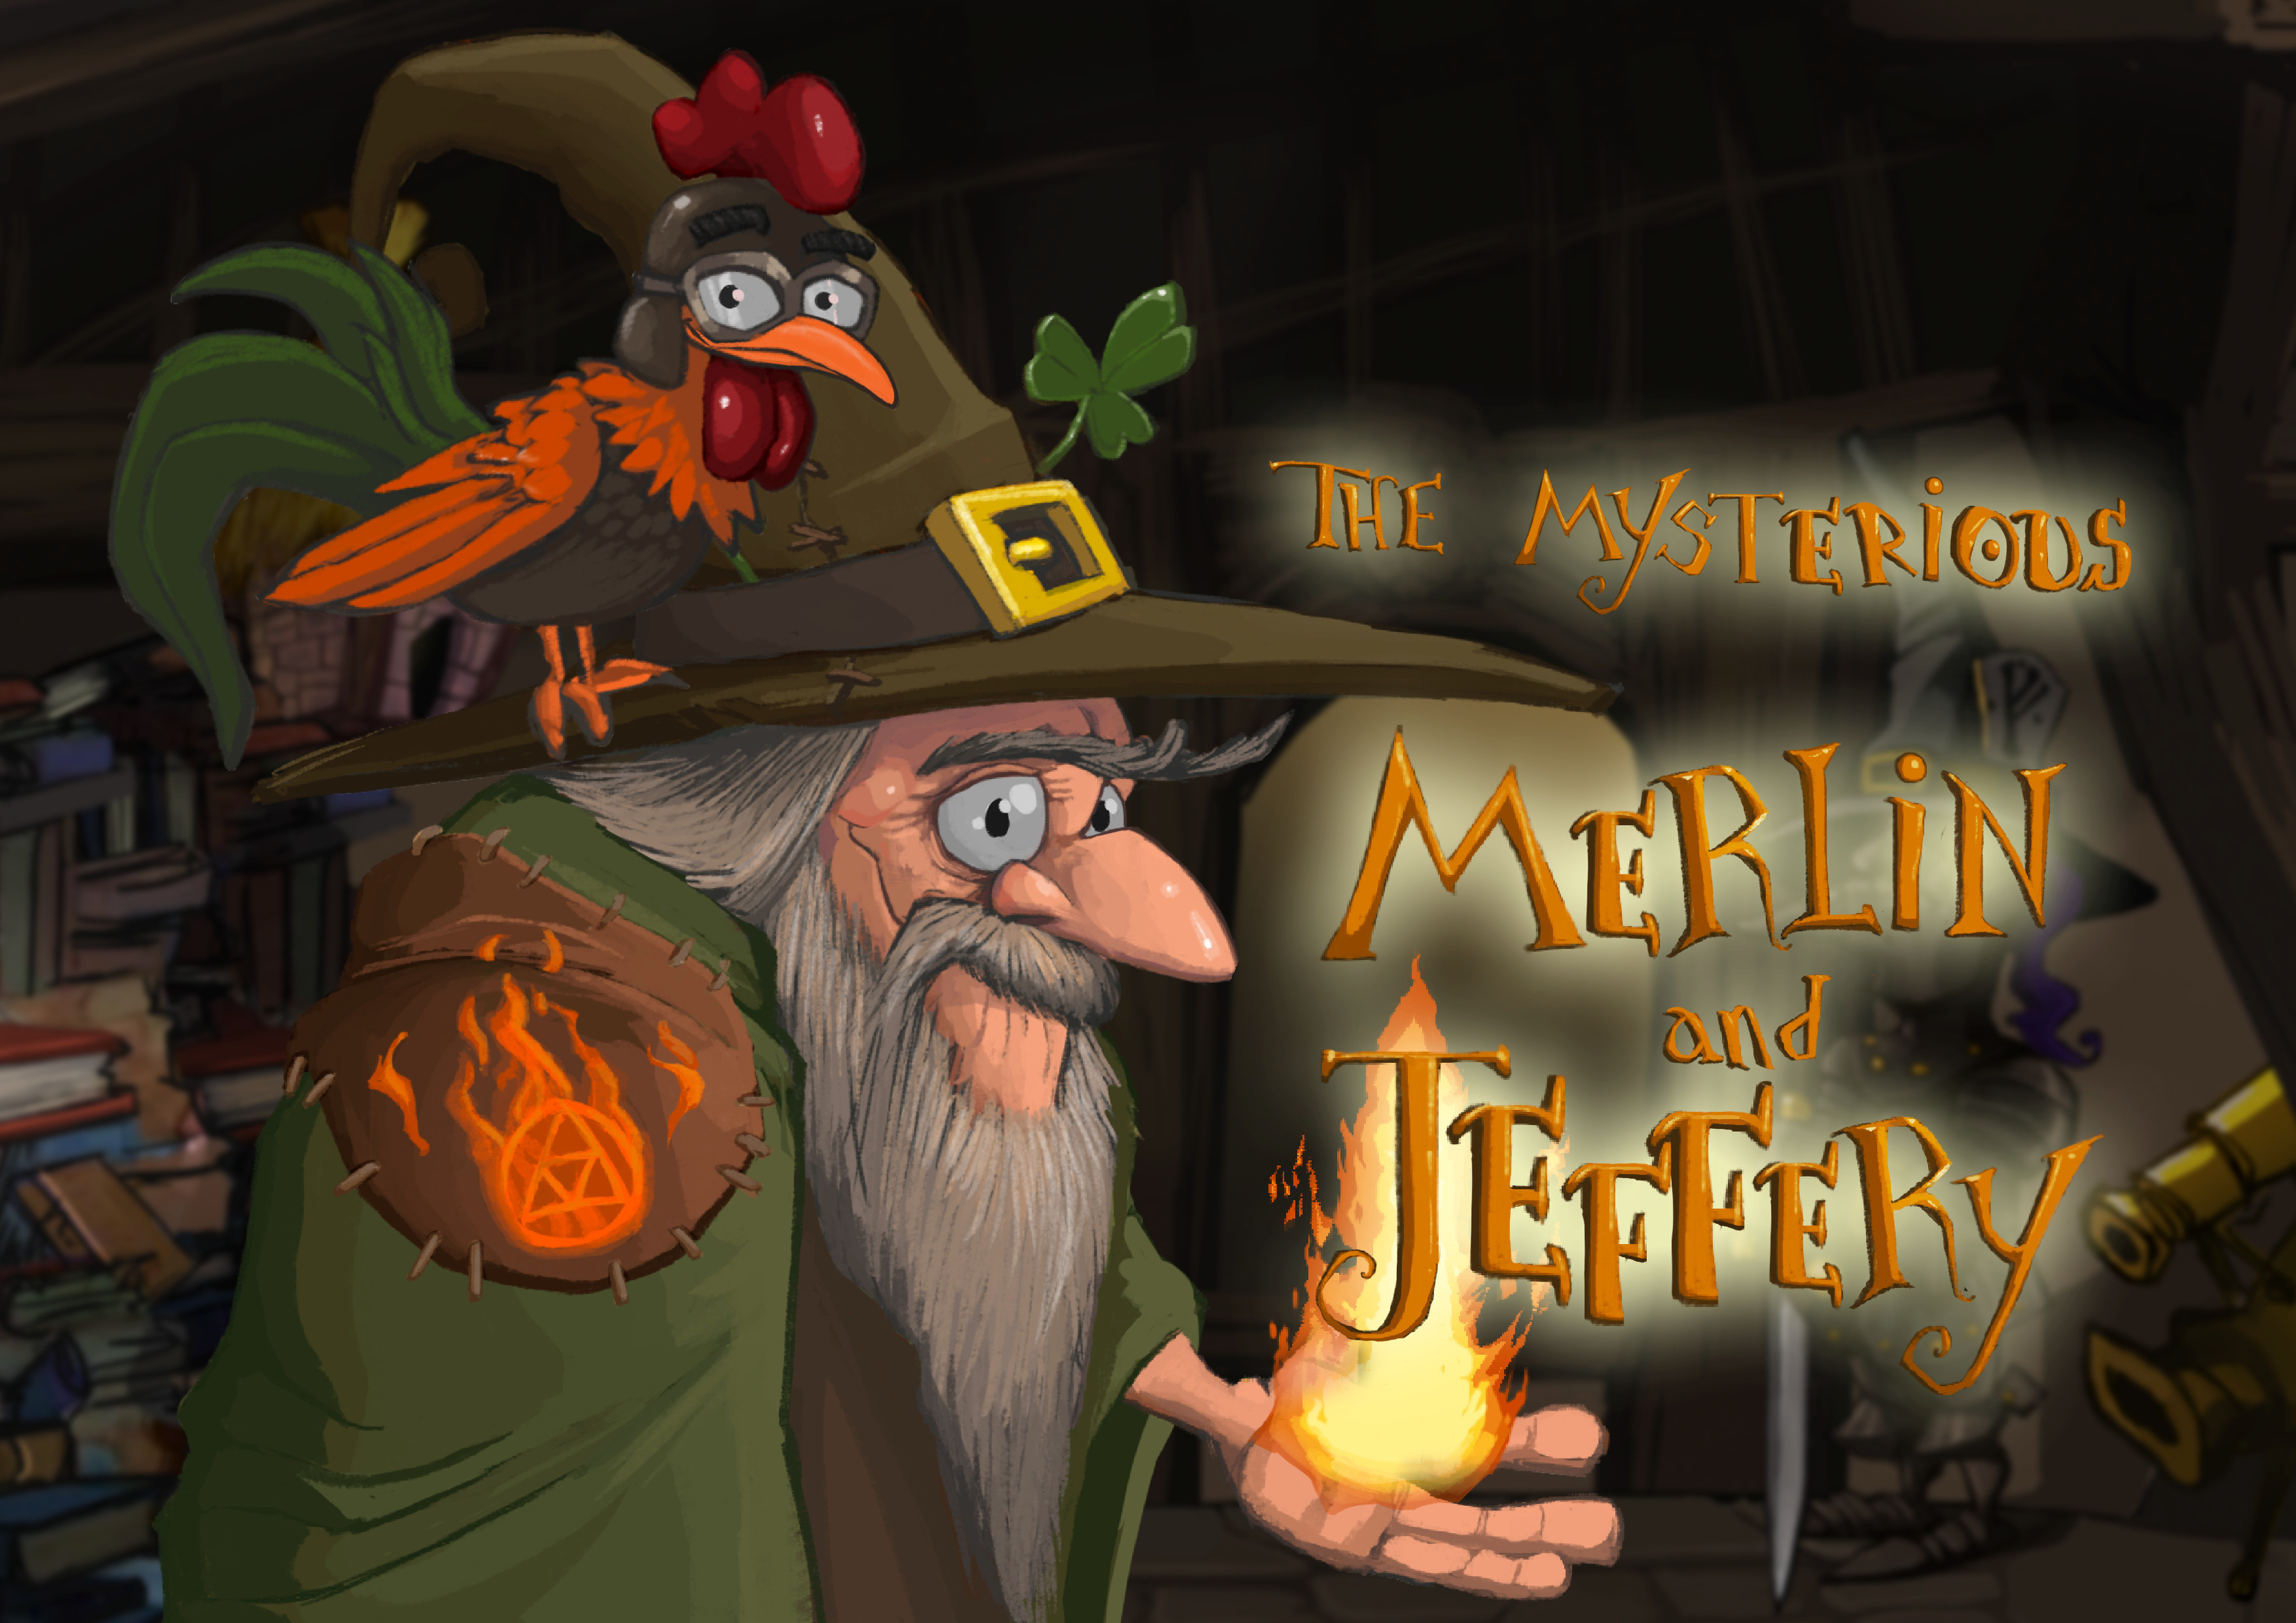 
Merlin the wizard and his chicken Jeffery are one of the three playable duos.